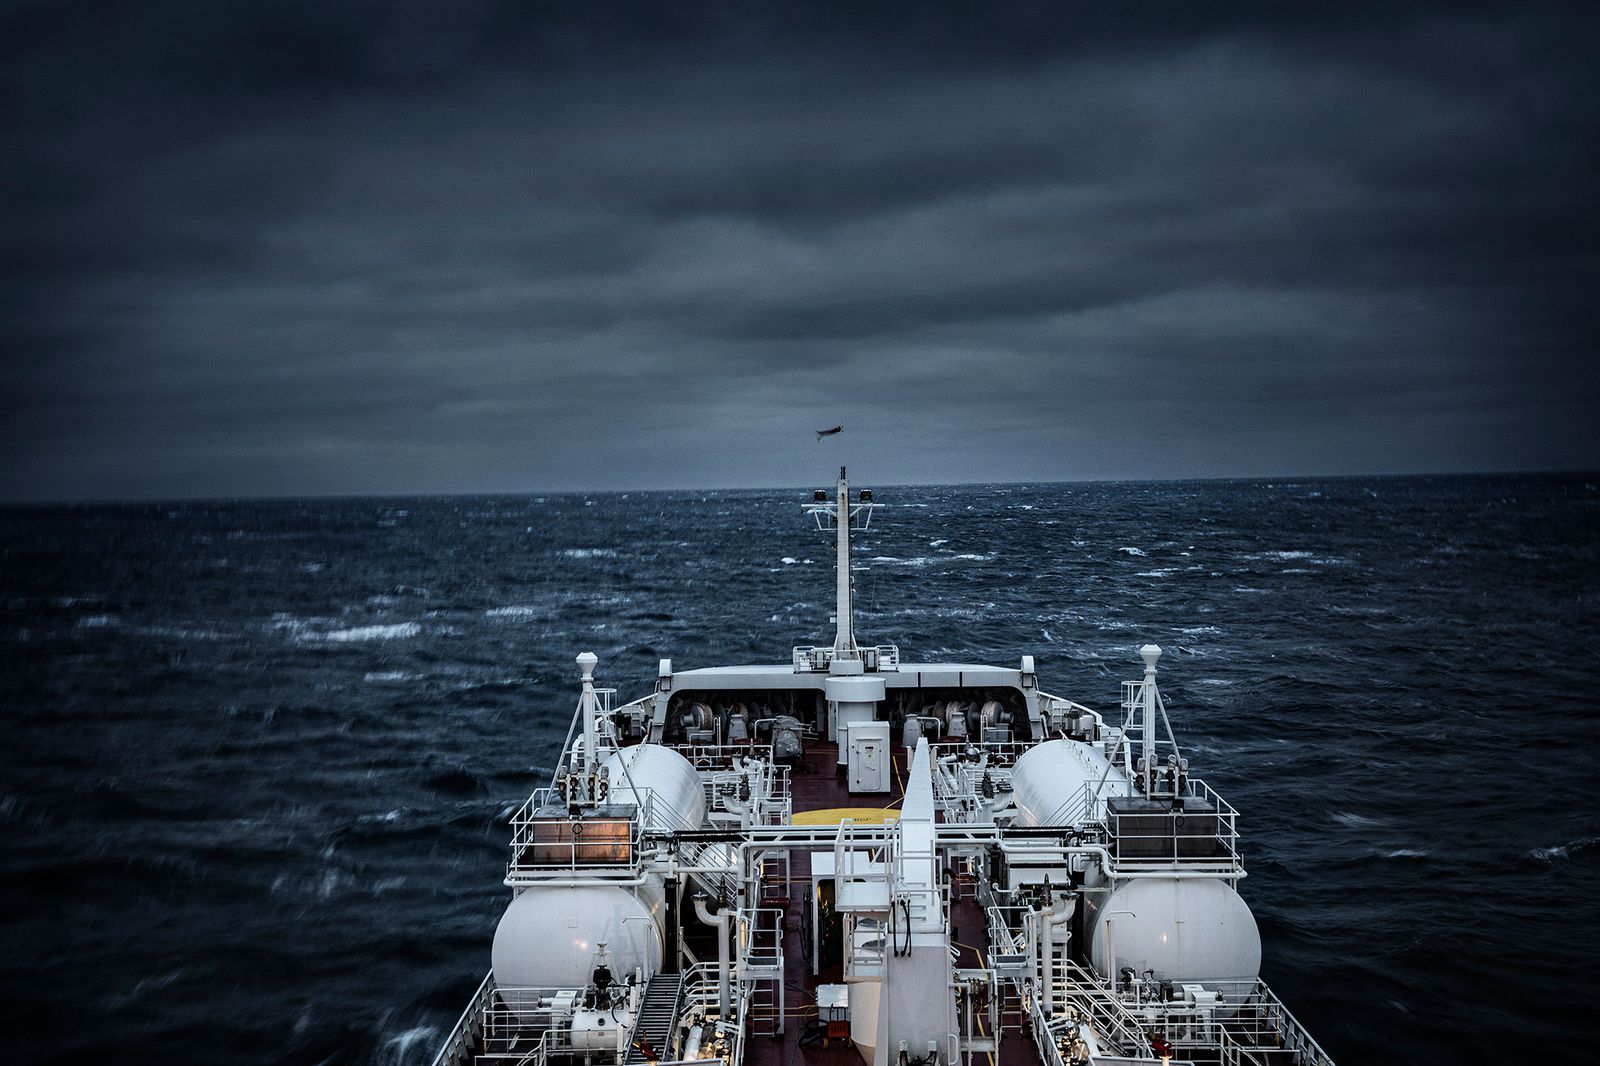 © Nina Varumo - Oil and chemical tanker Fure West is transporting cargo around Europe. Here at the Northern Sea